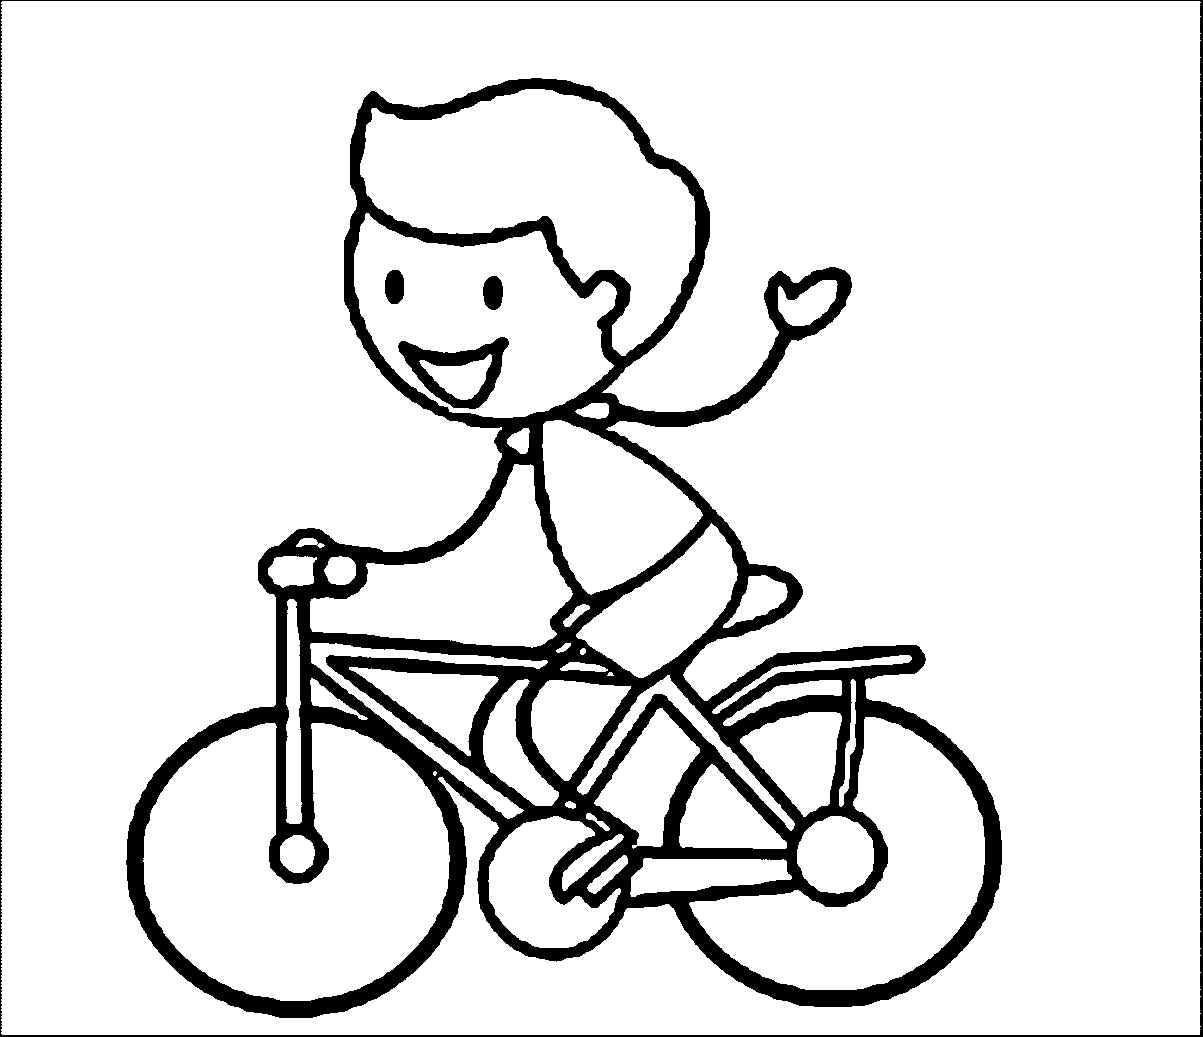 duck-on-a-bike-coloring-sheet-coloring-pages